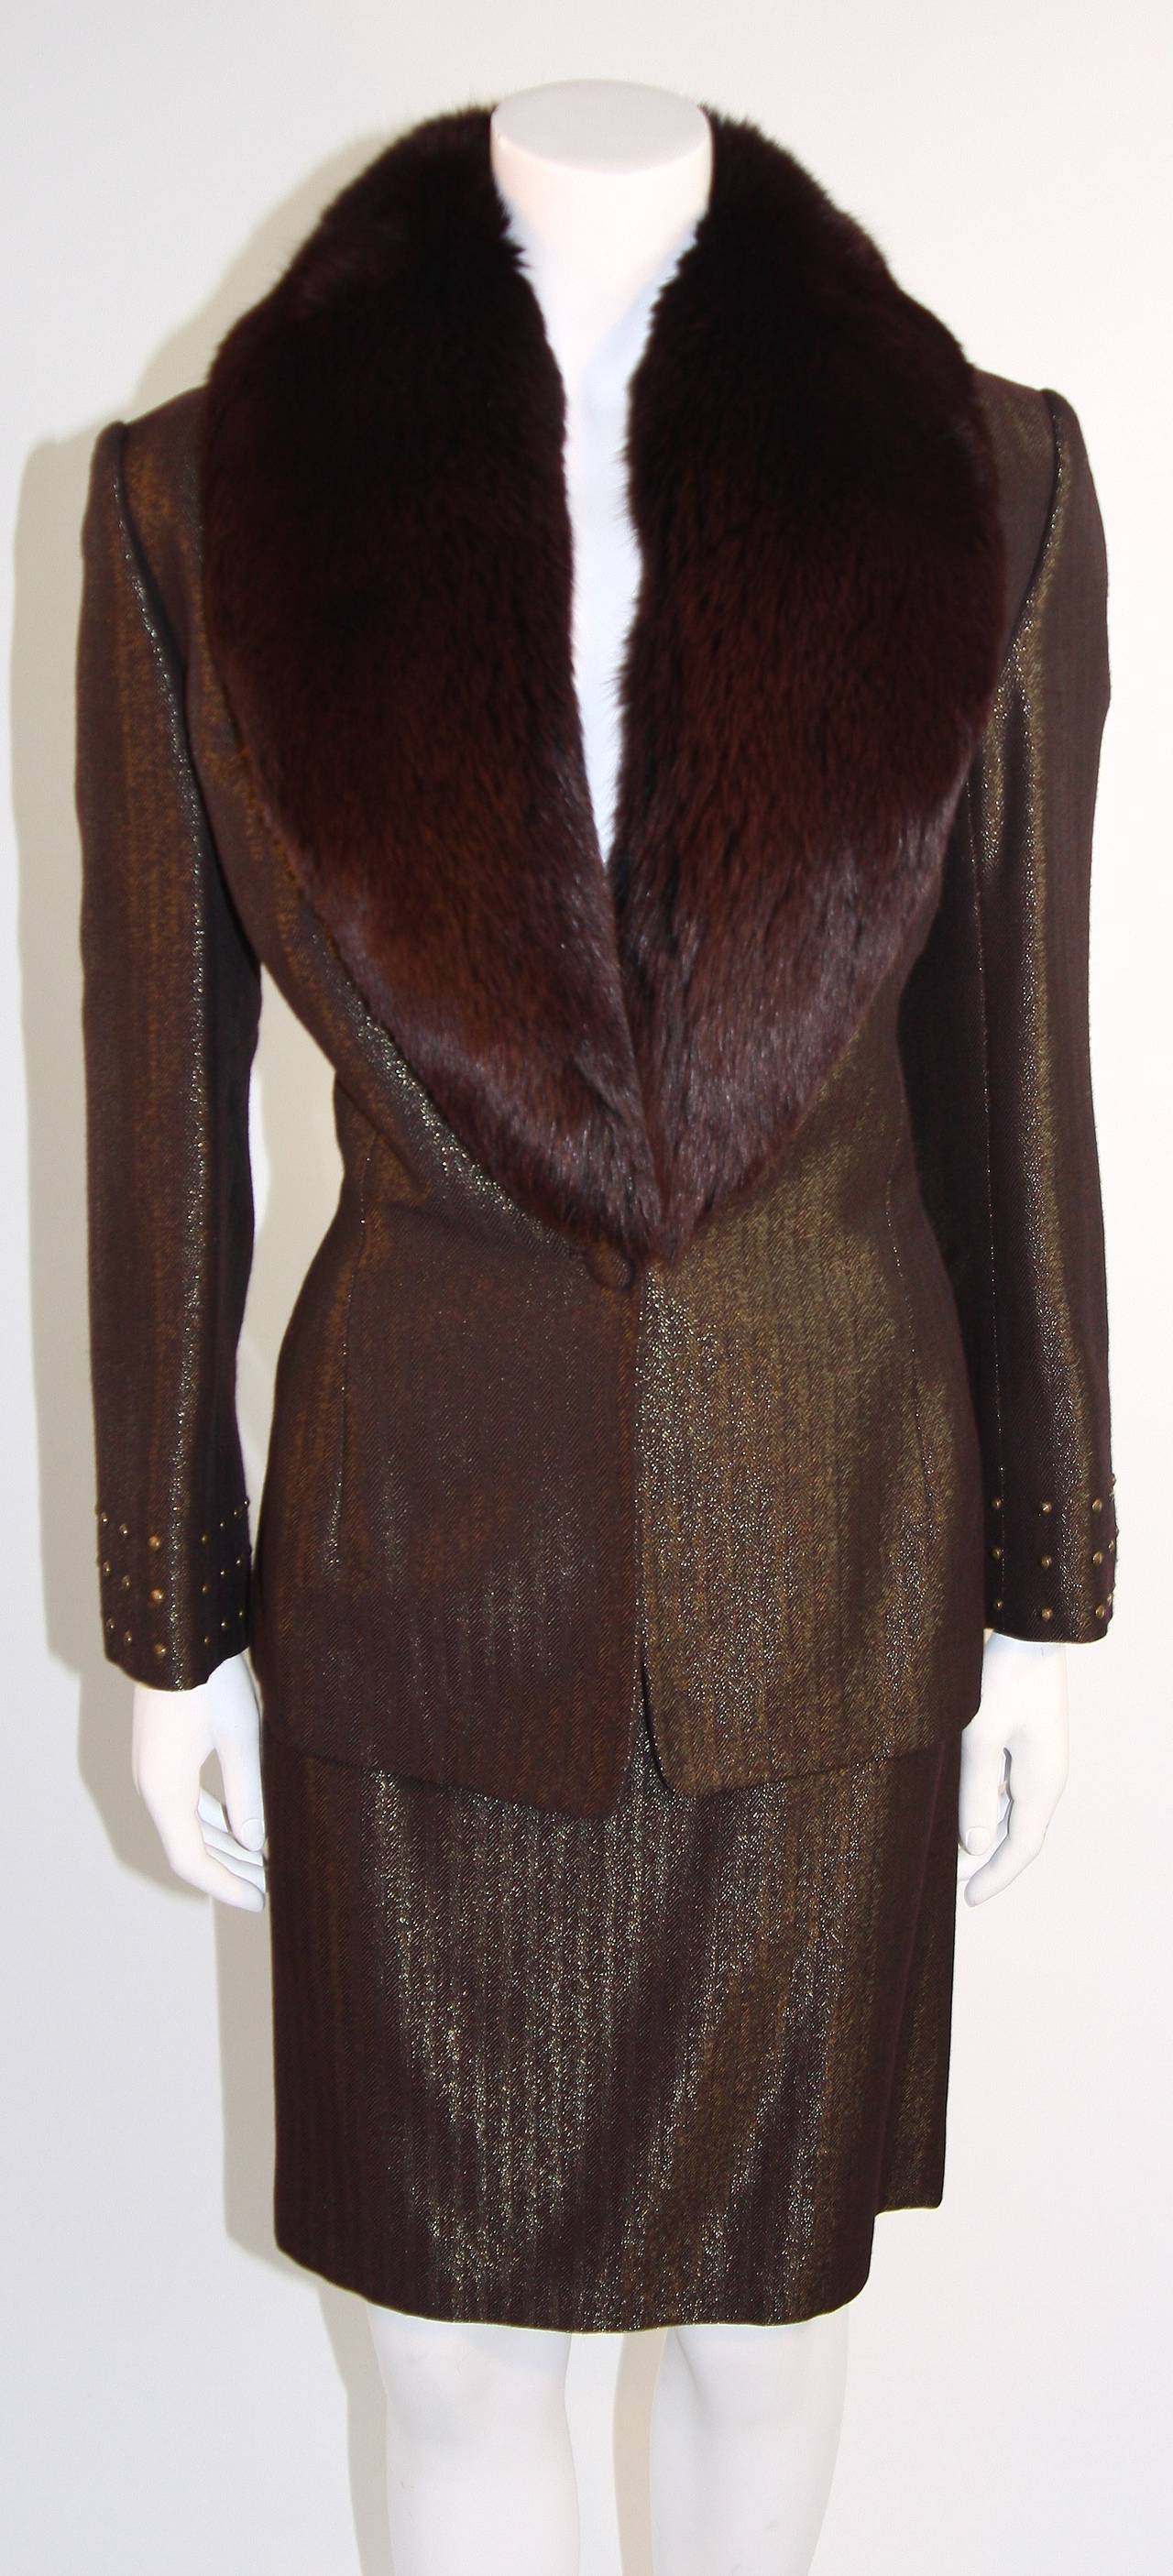 This is a stunning Badgley Mischka suit. The suit is composed of a beautiful burgundy metallic silk and features a detachable fox collar. The jacket has center front button closures and the skirt features a zipper closure. Made in U.S.A.